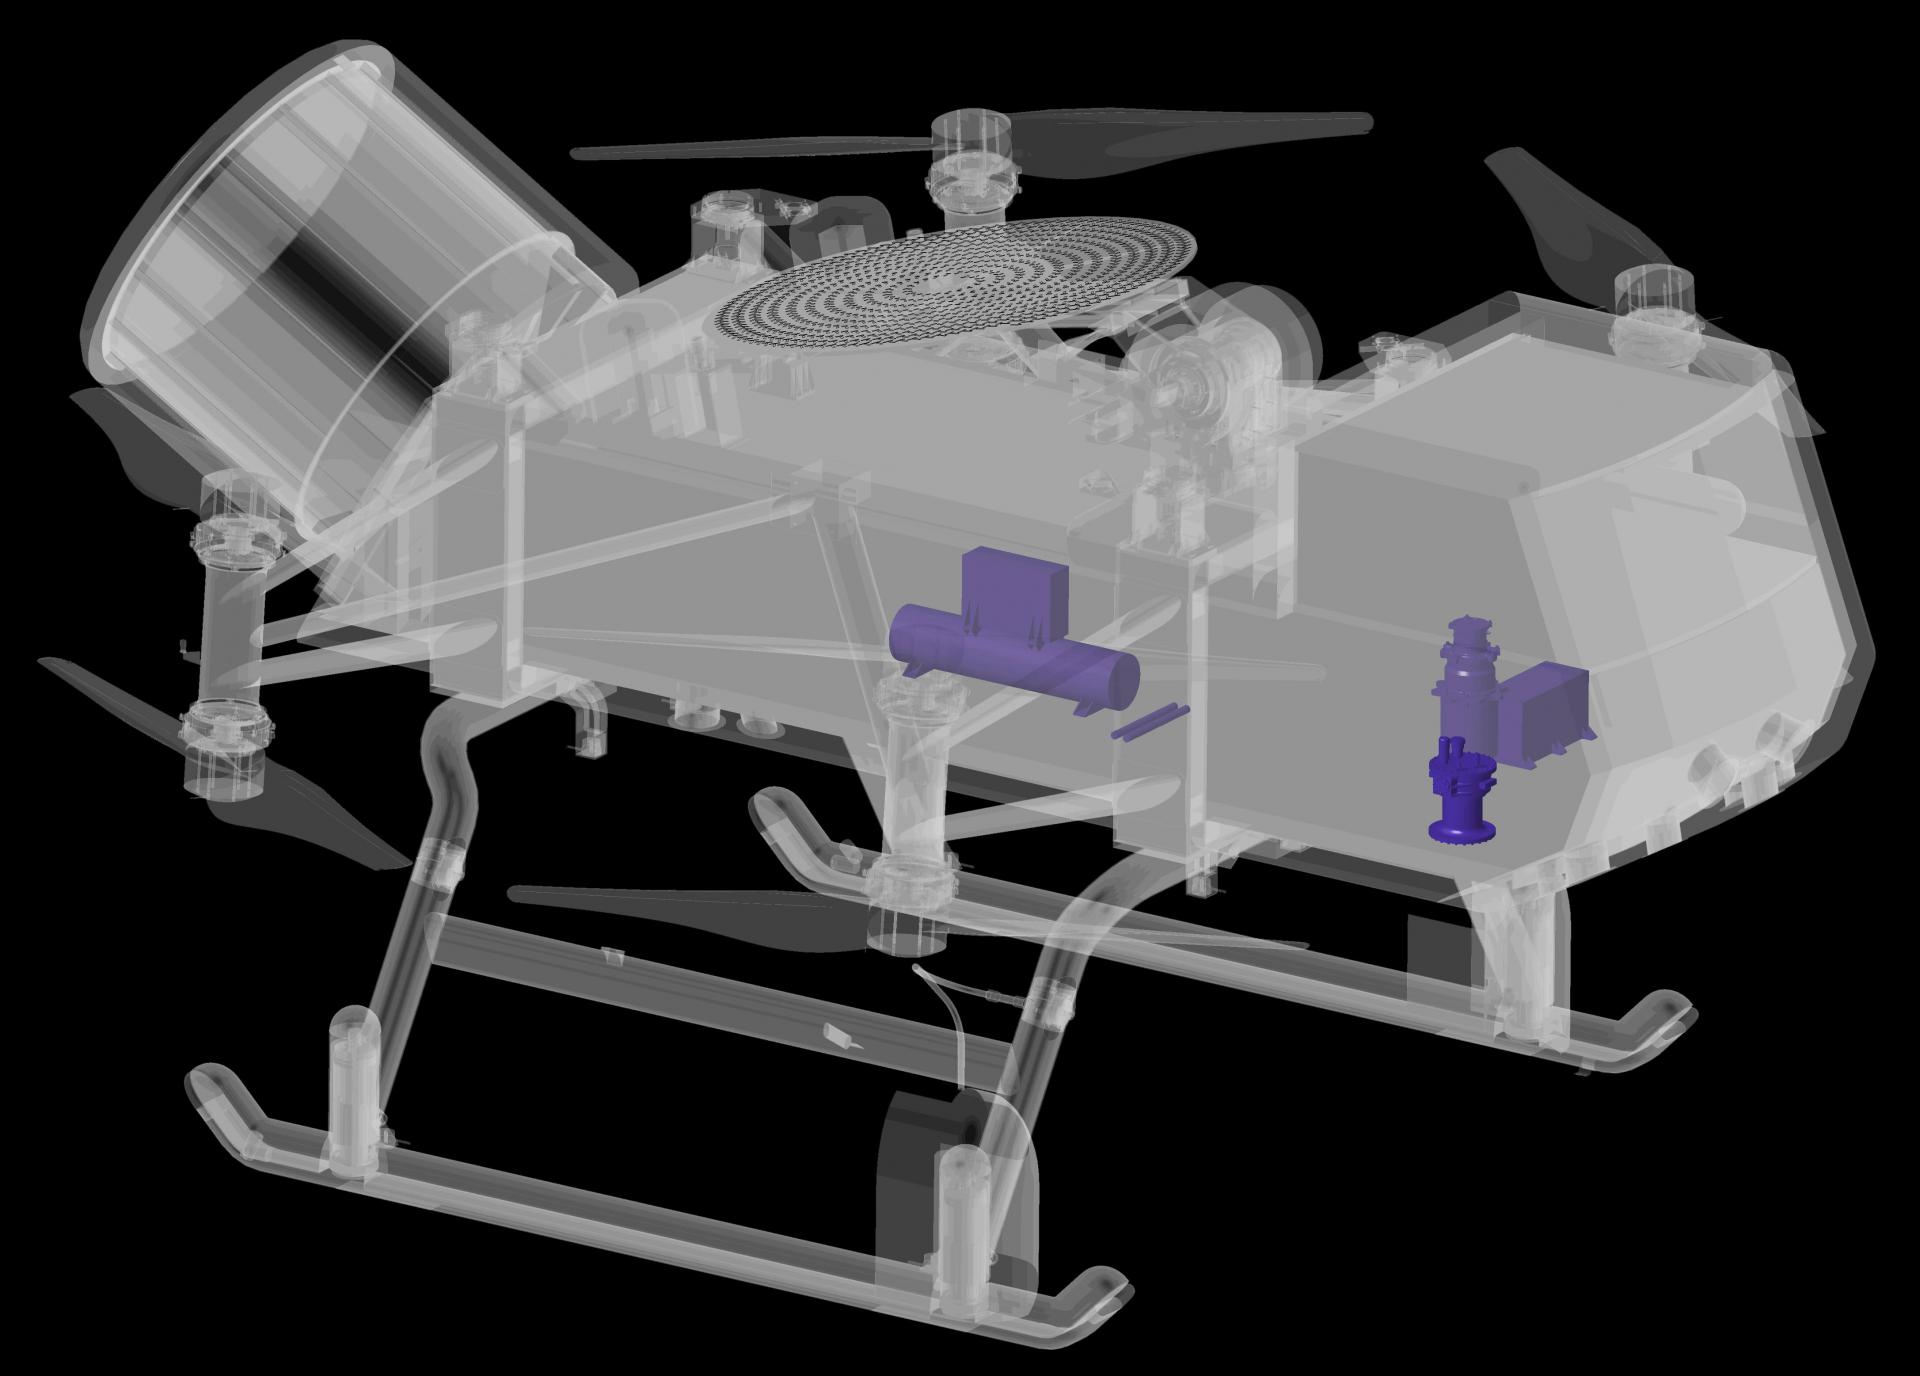 A transparent schematic of the Dragonfly spacecraft